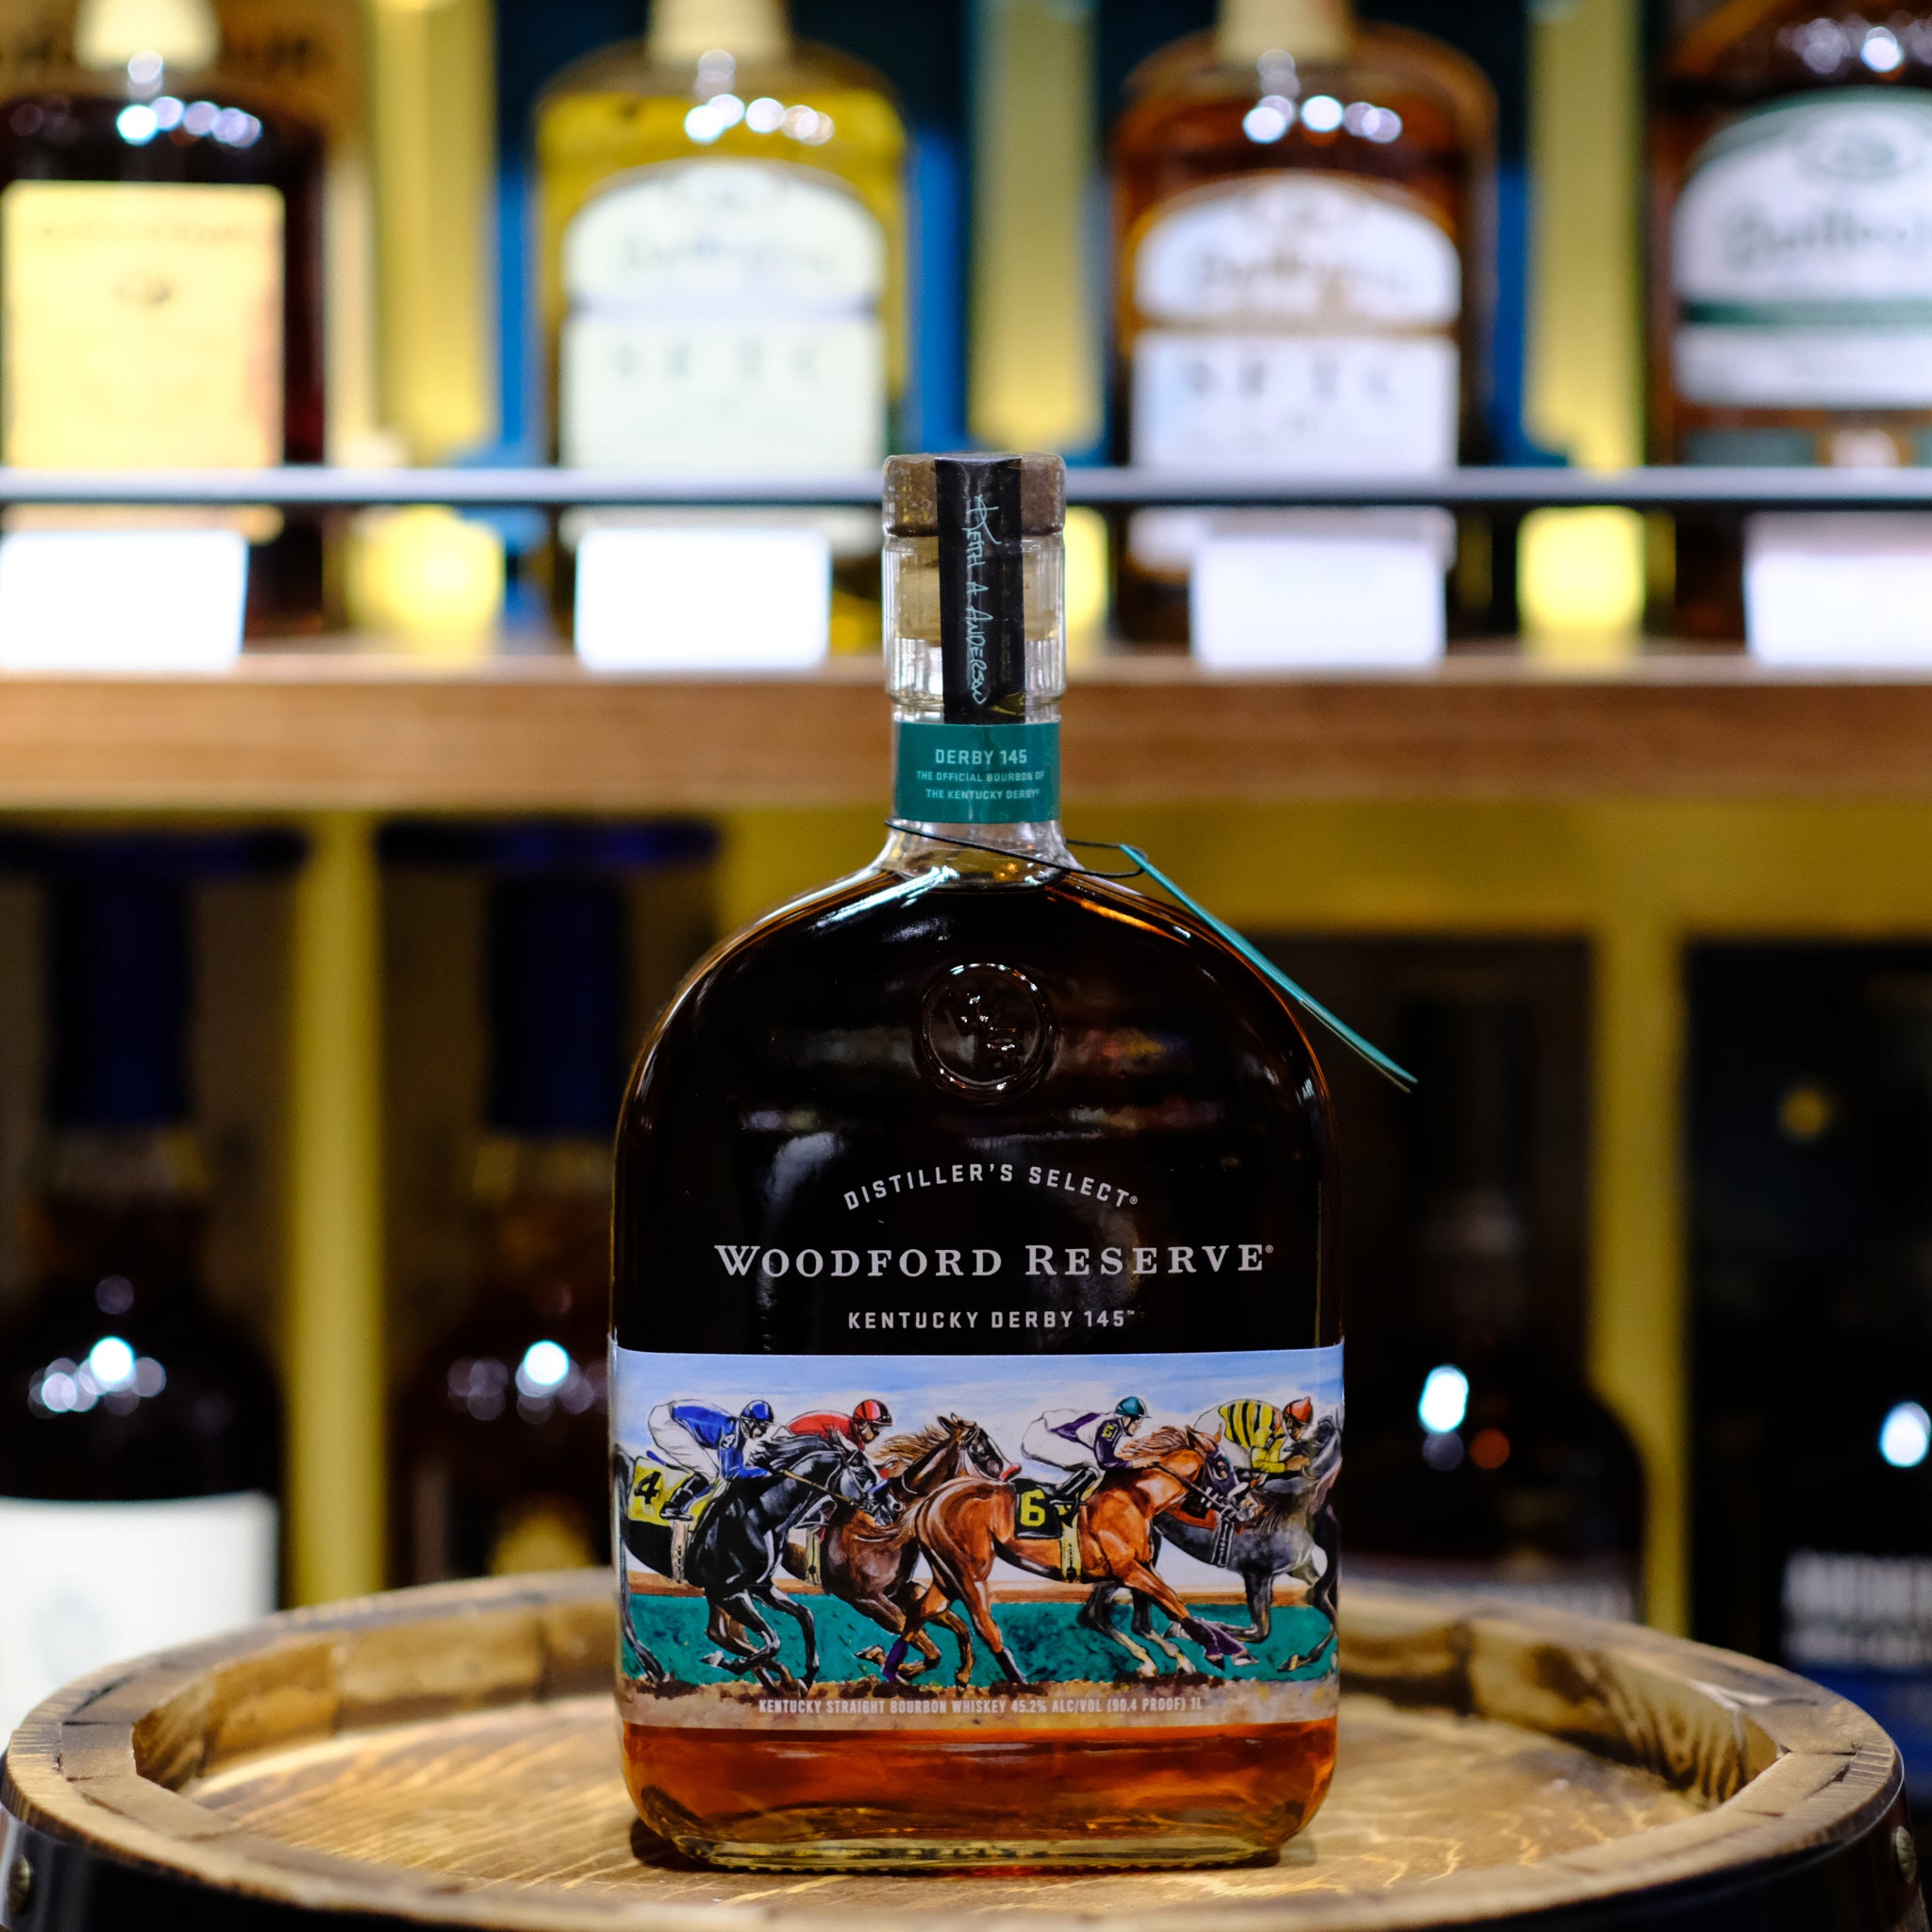 Woodford Reserve Kentucky Straight Bourbon Whiskey (Kentucky Derby 145 Limited Edition)